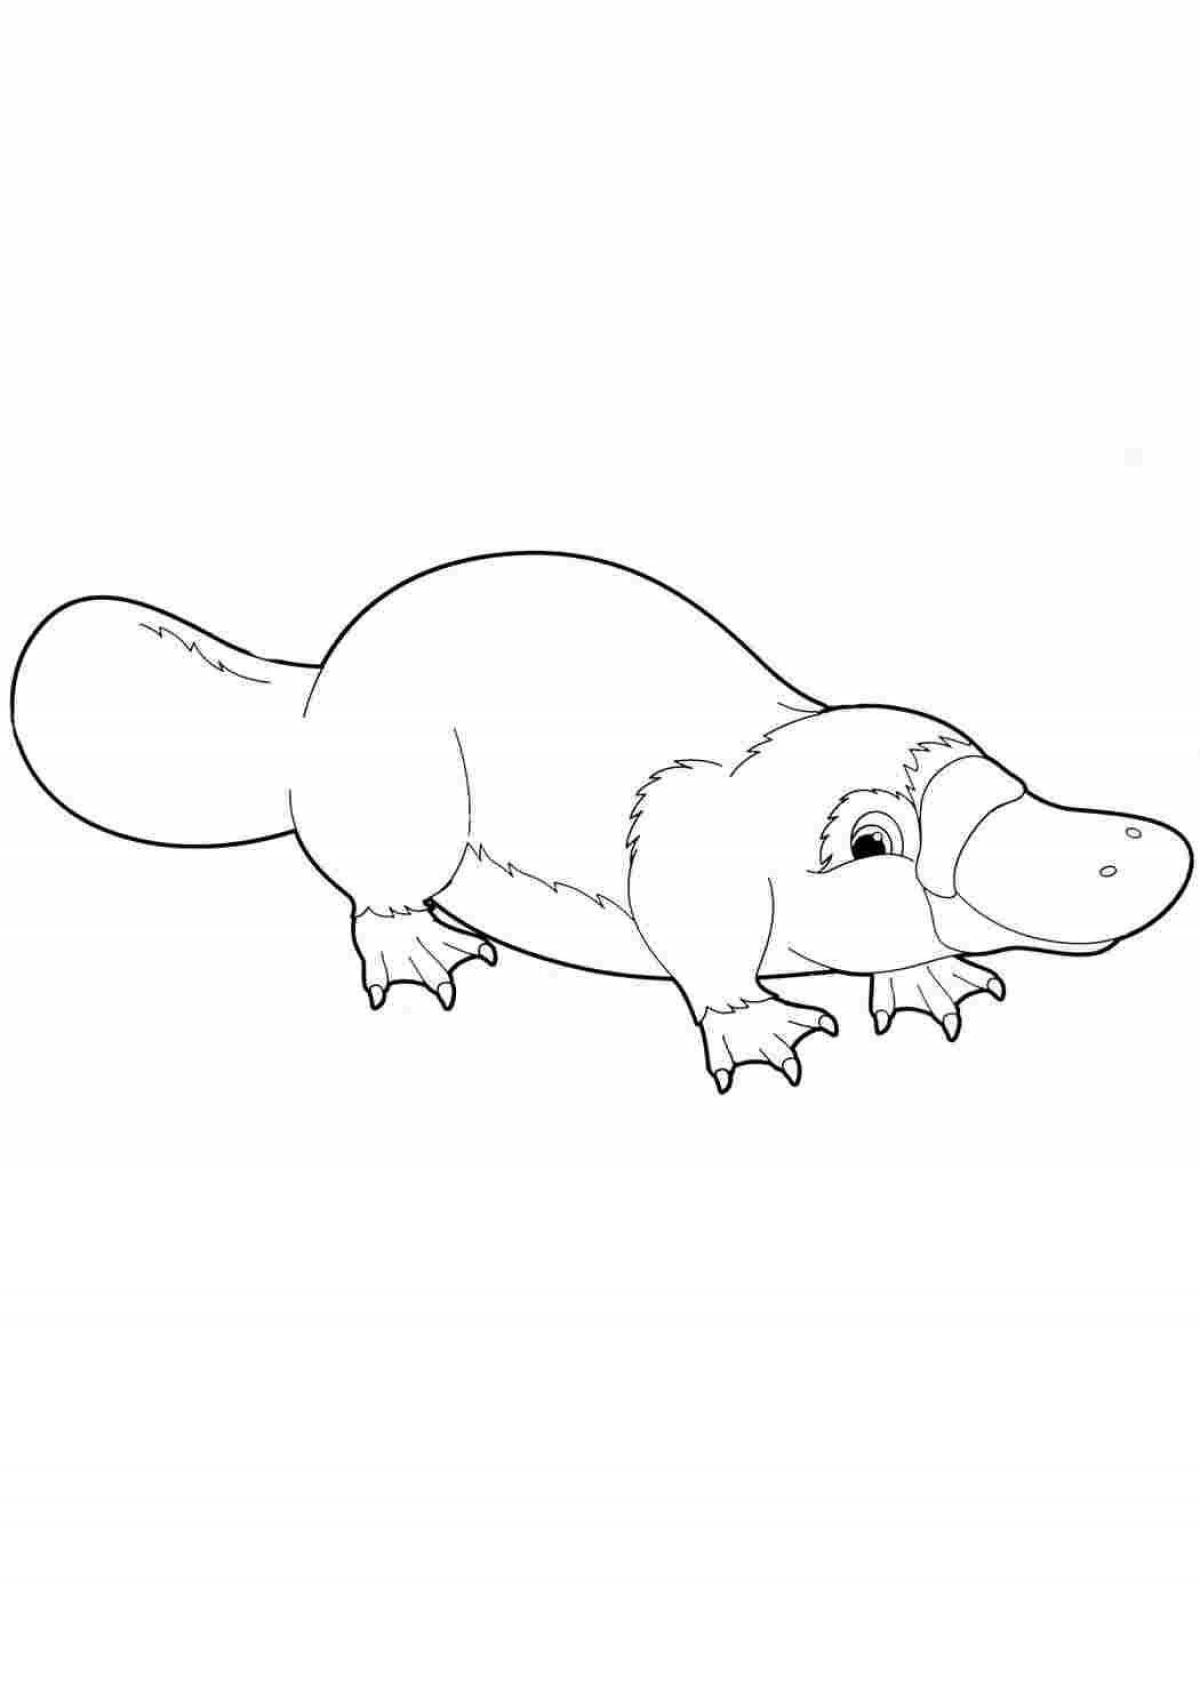 Fancy coloring platypus for kids